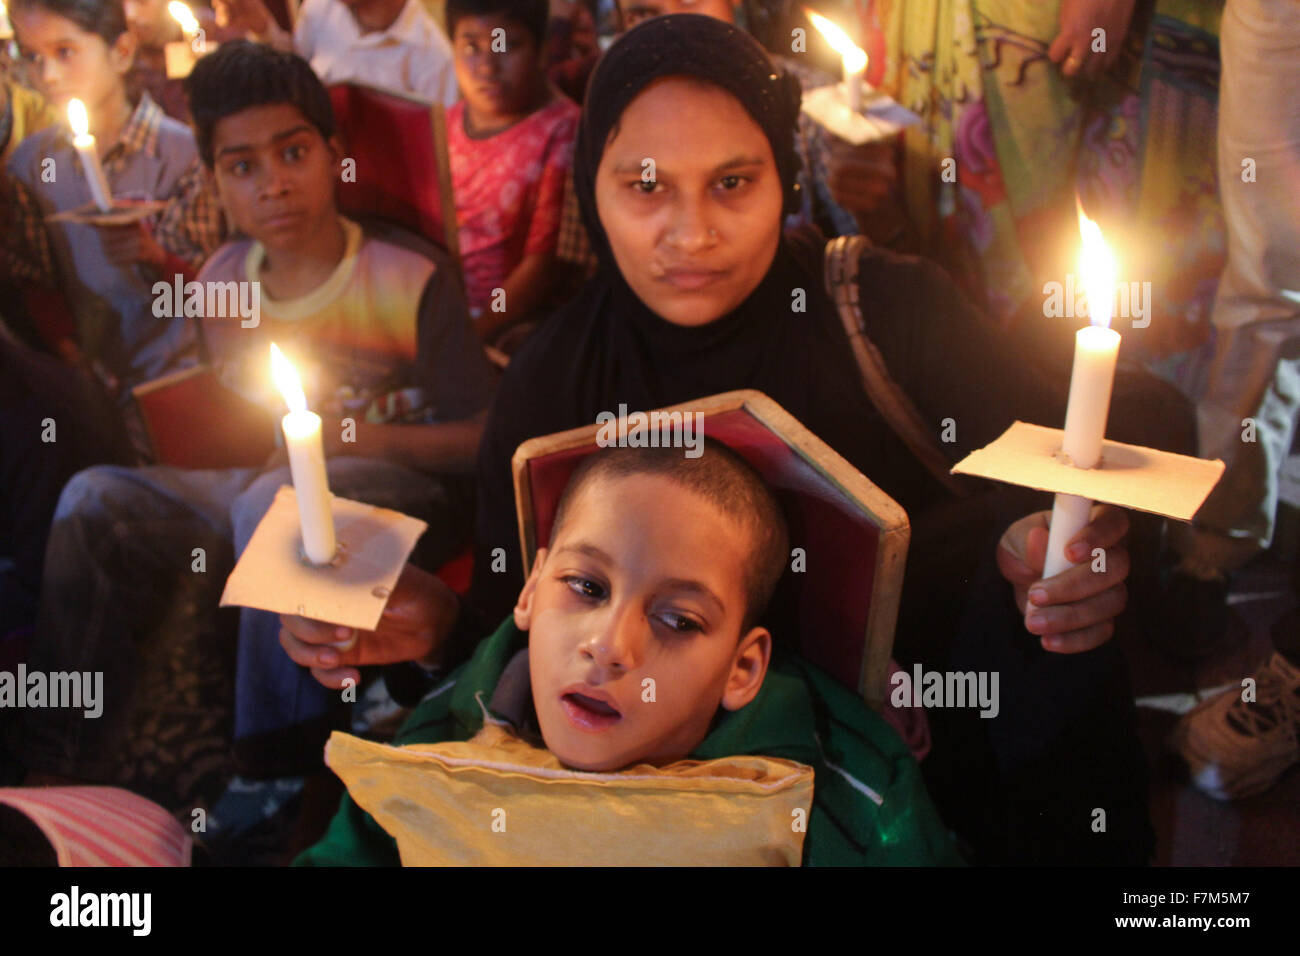 Bhopal, India. 1st Dec, 2015. People light candles during a vigil marking the 31st anniversary of the gas tragedy in Bhopal, India, Dec. 1, 2015. More than 15,000 residents were killed by the gas leakage from the Union Carbide pesticide plant on the night of Dec. 2 to 3, 1984 in Bhopal, considered the world's worst industrial disaster. © Stringer/Xinhua/Alamy Live News Stock Photo